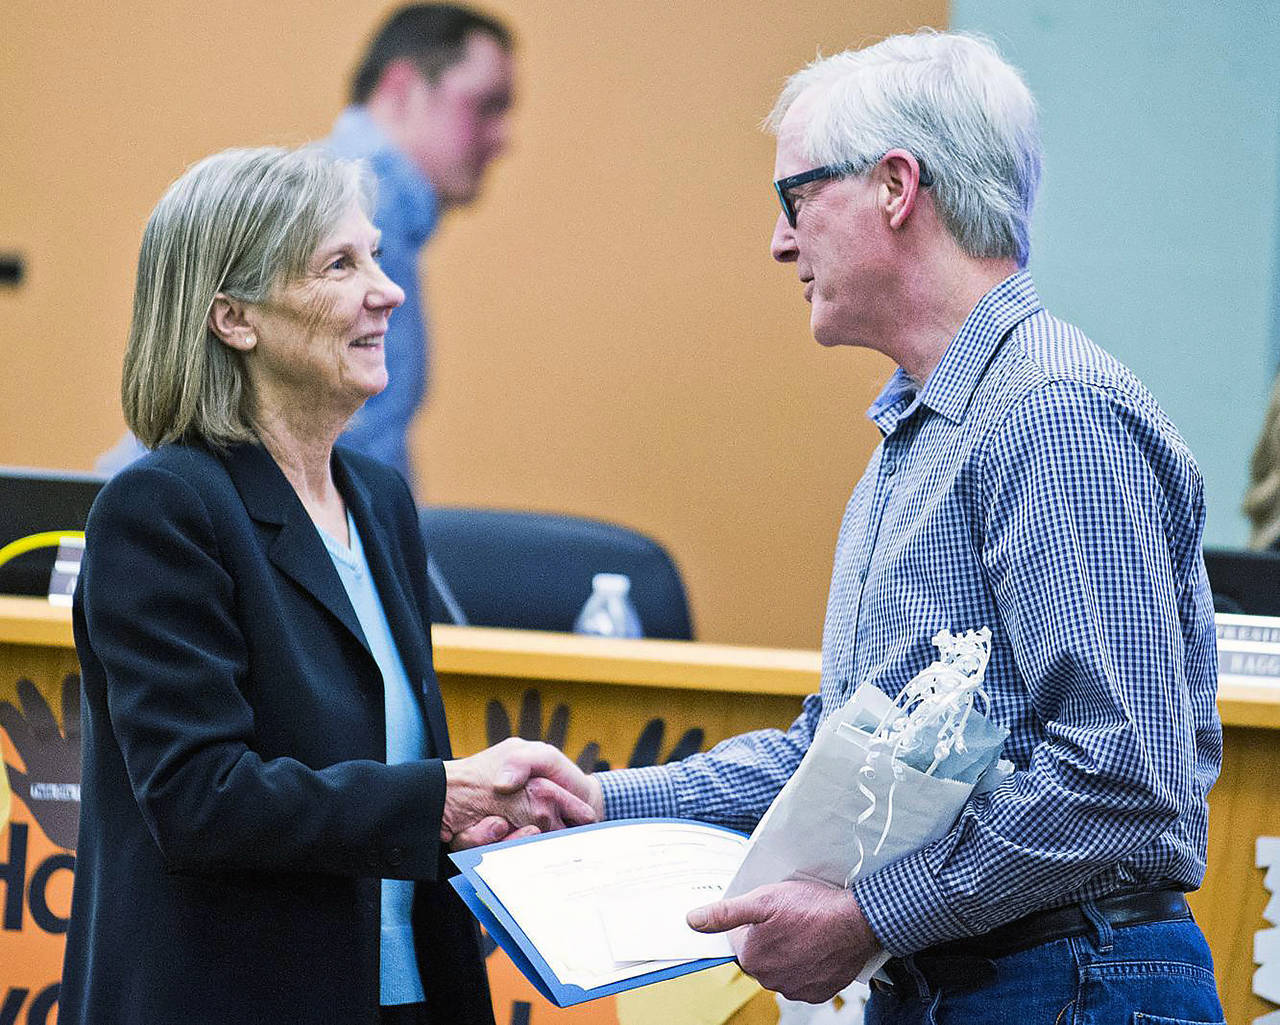 Jean Shumate (left), seen here during a February 2019 school board meeting, will retire June 30 after 20 years at the Stanwood-Camano School District superintendent. (Skagit Valley Herald, file)